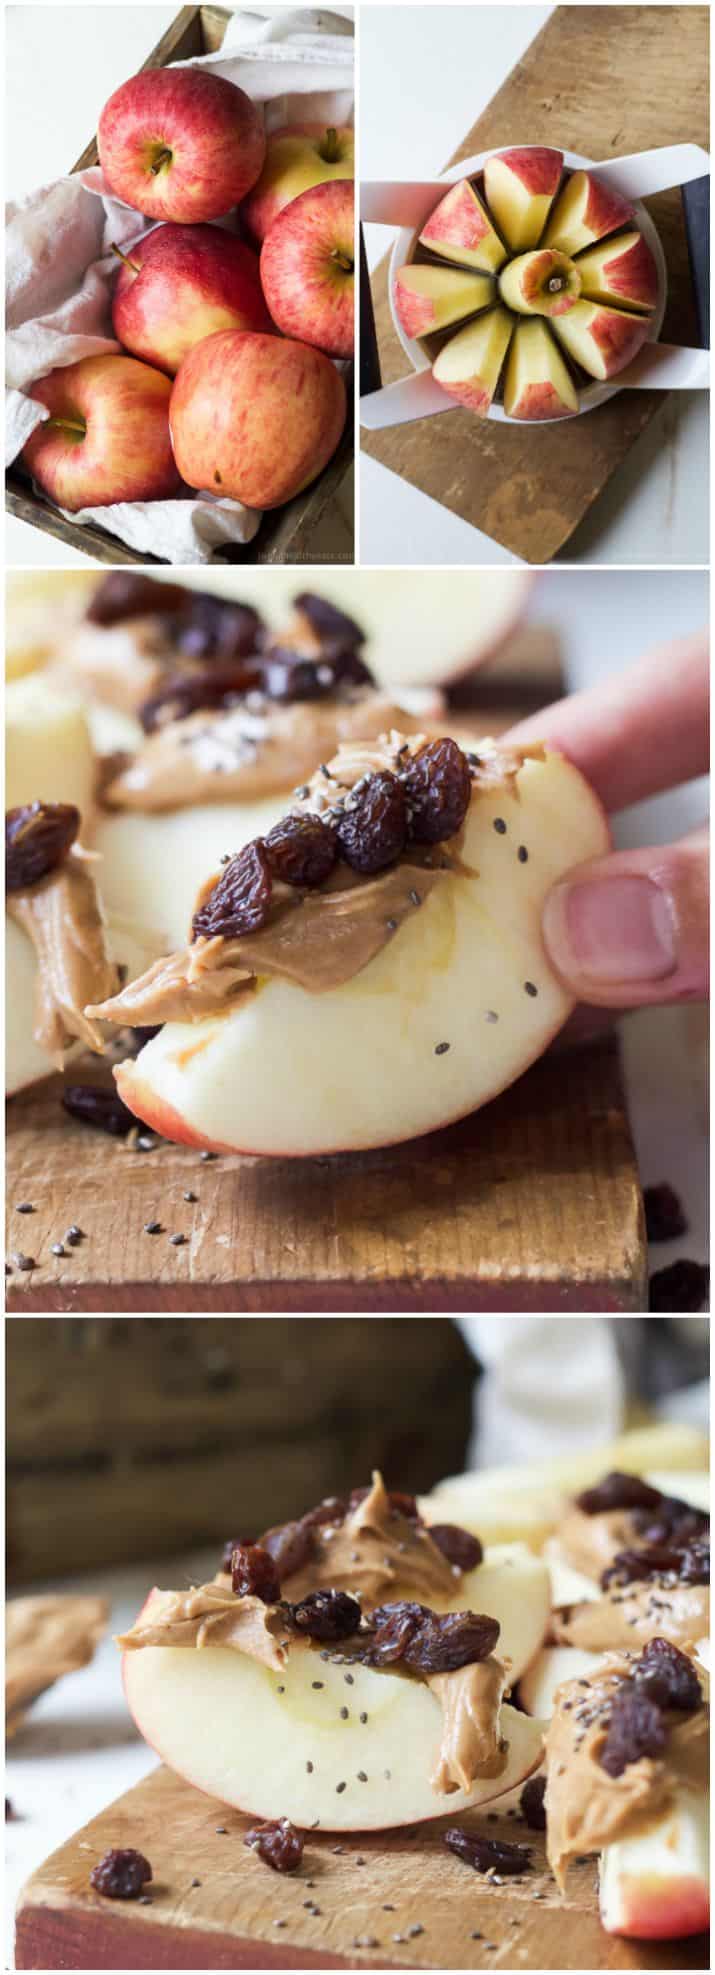 Collage of apple wedges with peanut butter, dried cranberries, and chia seeds